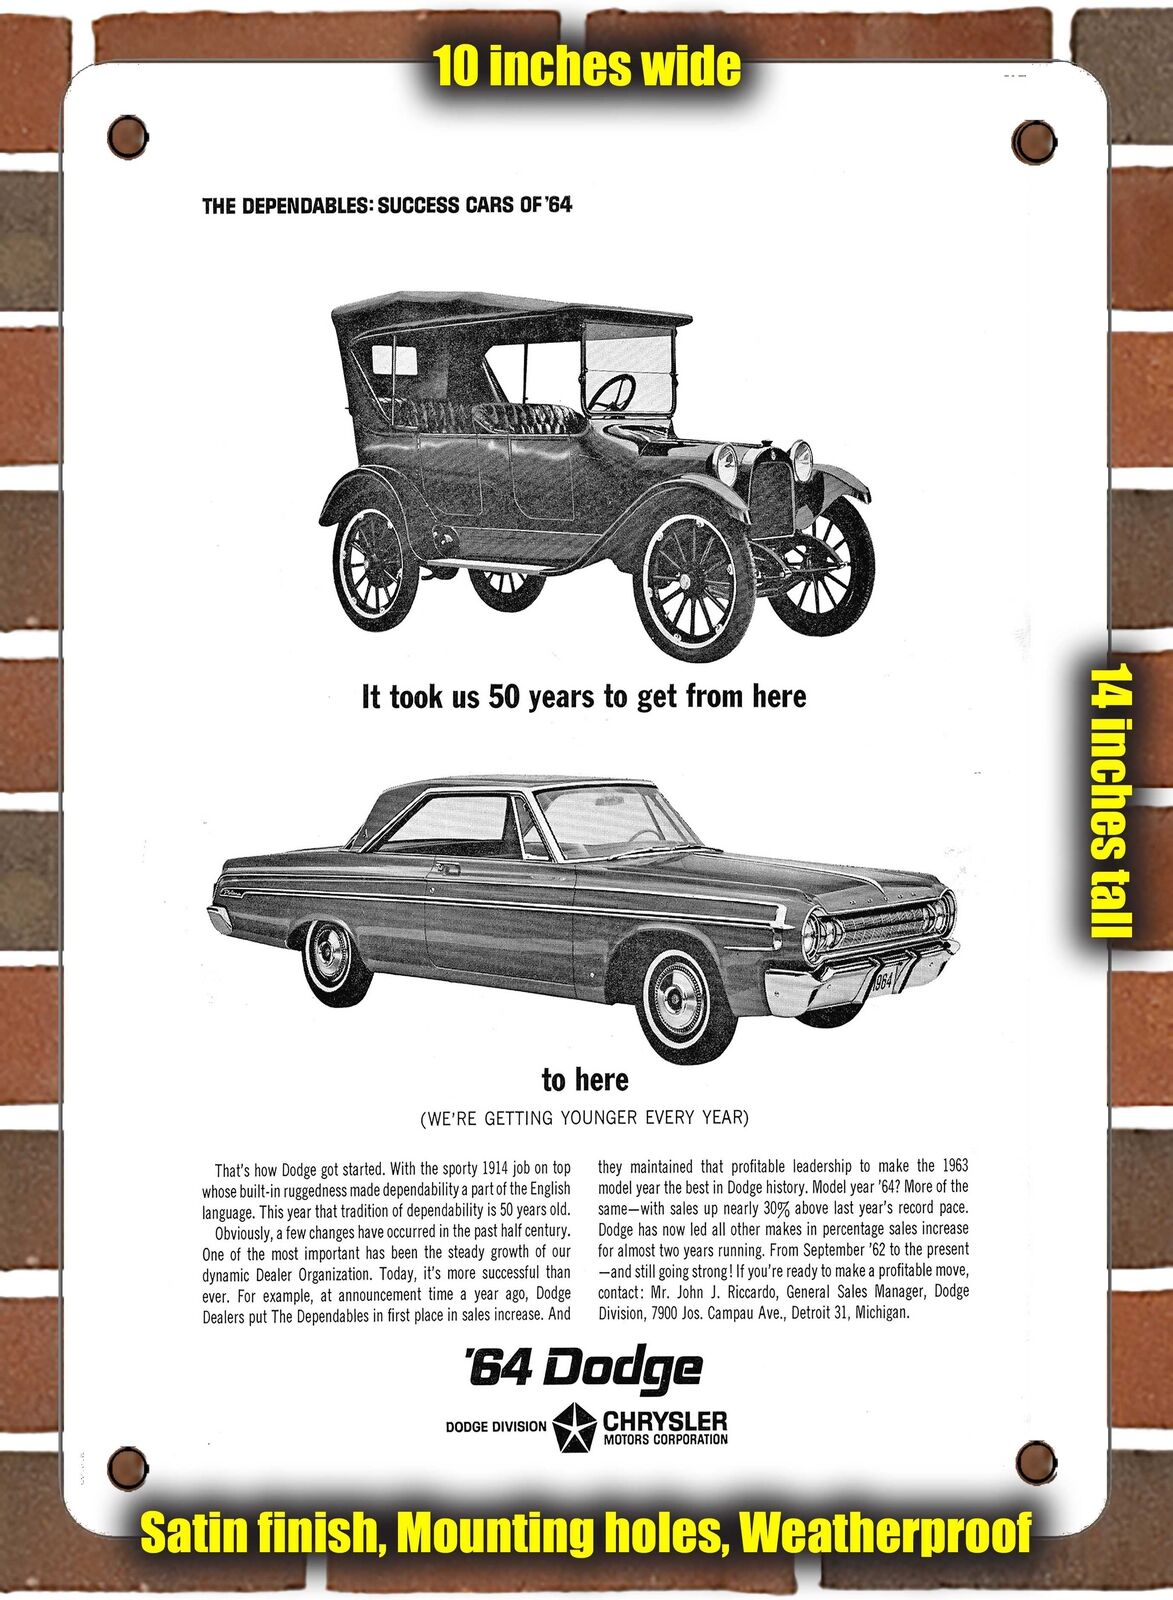 METAL SIGN - 1964 Dodge 1914 1964 Dodge Cars - 10x14 Inches